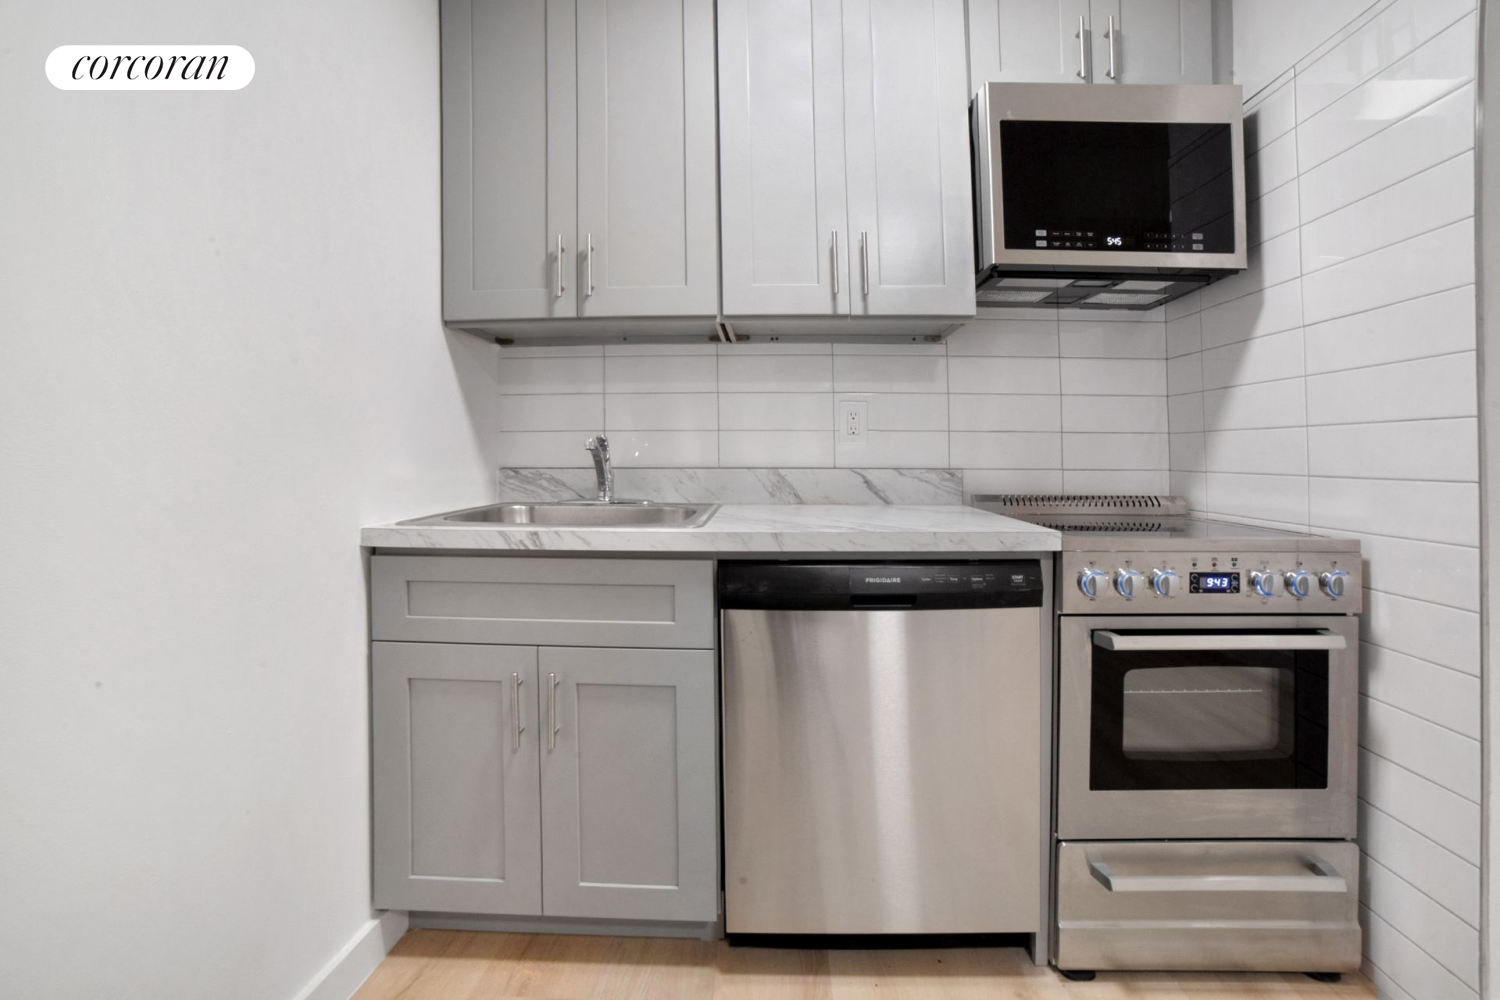 312 East 85th Street 2Bd, Yorkville, Upper East Side, NYC - 2 Bedrooms  
2 Bathrooms  
5 Rooms - 